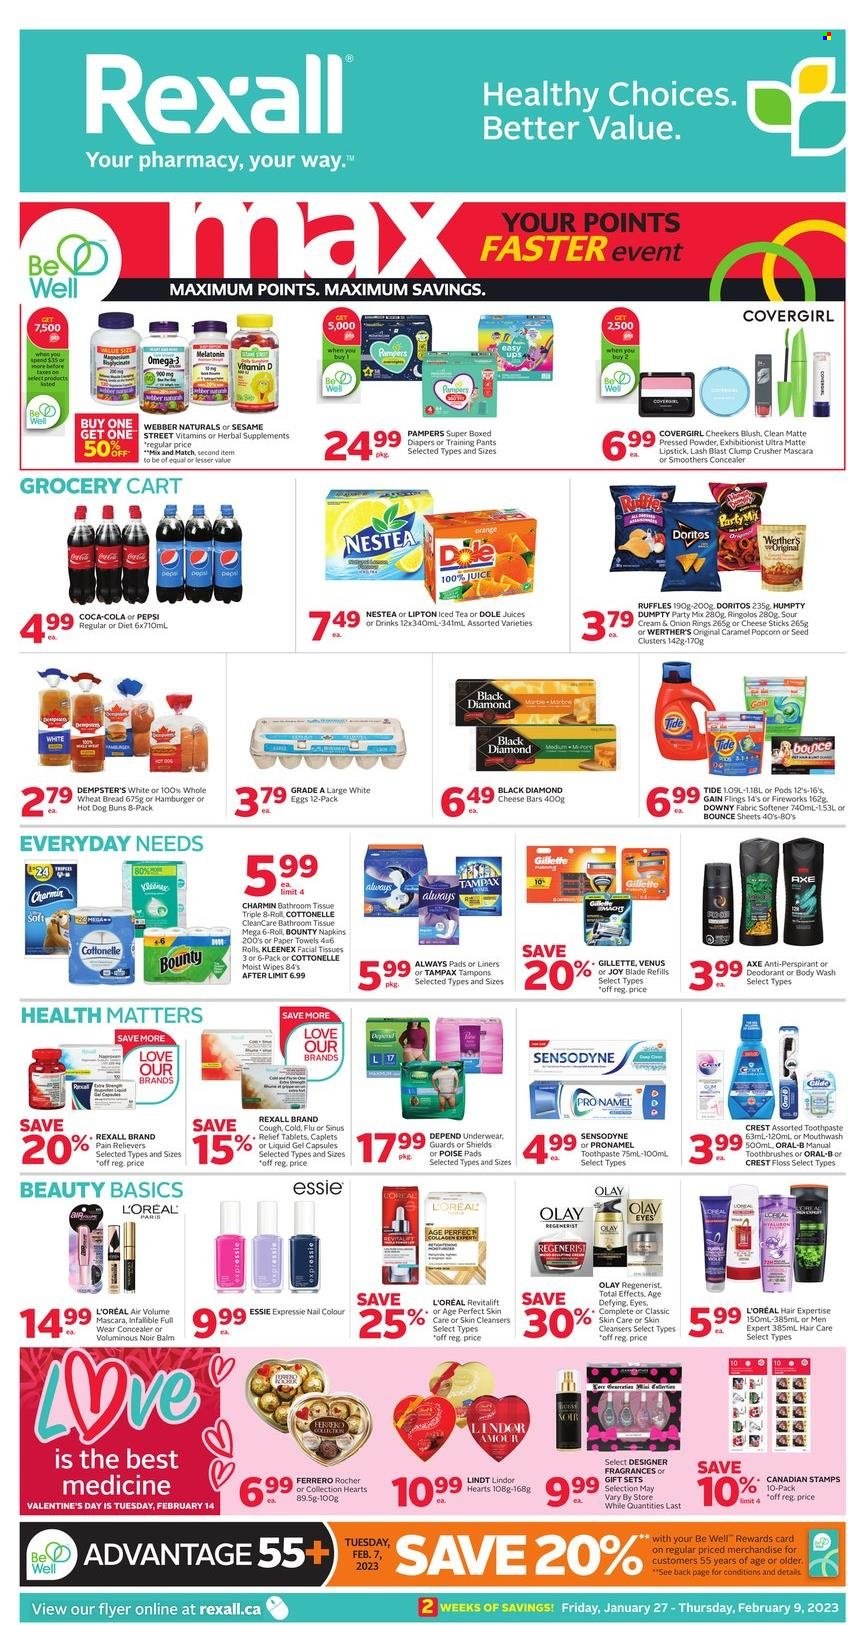 thumbnail - Rexall Flyer - January 27, 2023 - February 09, 2023 - Sales products - wheat bread, buns, eggs, onion rings, cheese sticks, Bounty, hamper, Sesame Street, Doritos, Ruffles, Dole, caramel, Pepsi, juice, ice tea, Bai, wipes, Pampers, pants, nappies, napkins, baby pants, bath tissue, Cottonelle, Kleenex, kitchen towels, paper towels, Charmin, Gain, Tide, fabric softener, Bounce, Downy Laundry, Joy, body wash, toothpaste, mouthwash, Crest, Always pads, sanitary pads, tampons, facial tissues, Gillette, L’Oréal, Olay, anti-perspirant, Axe, Venus, corrector, lipstick, mascara, face powder, magnesium, Melatonin, Omega-3, Tampax, Oral-B, Sensodyne, Lipton, Lindt, Lindor, Ferrero Rocher, deodorant. Page 1.